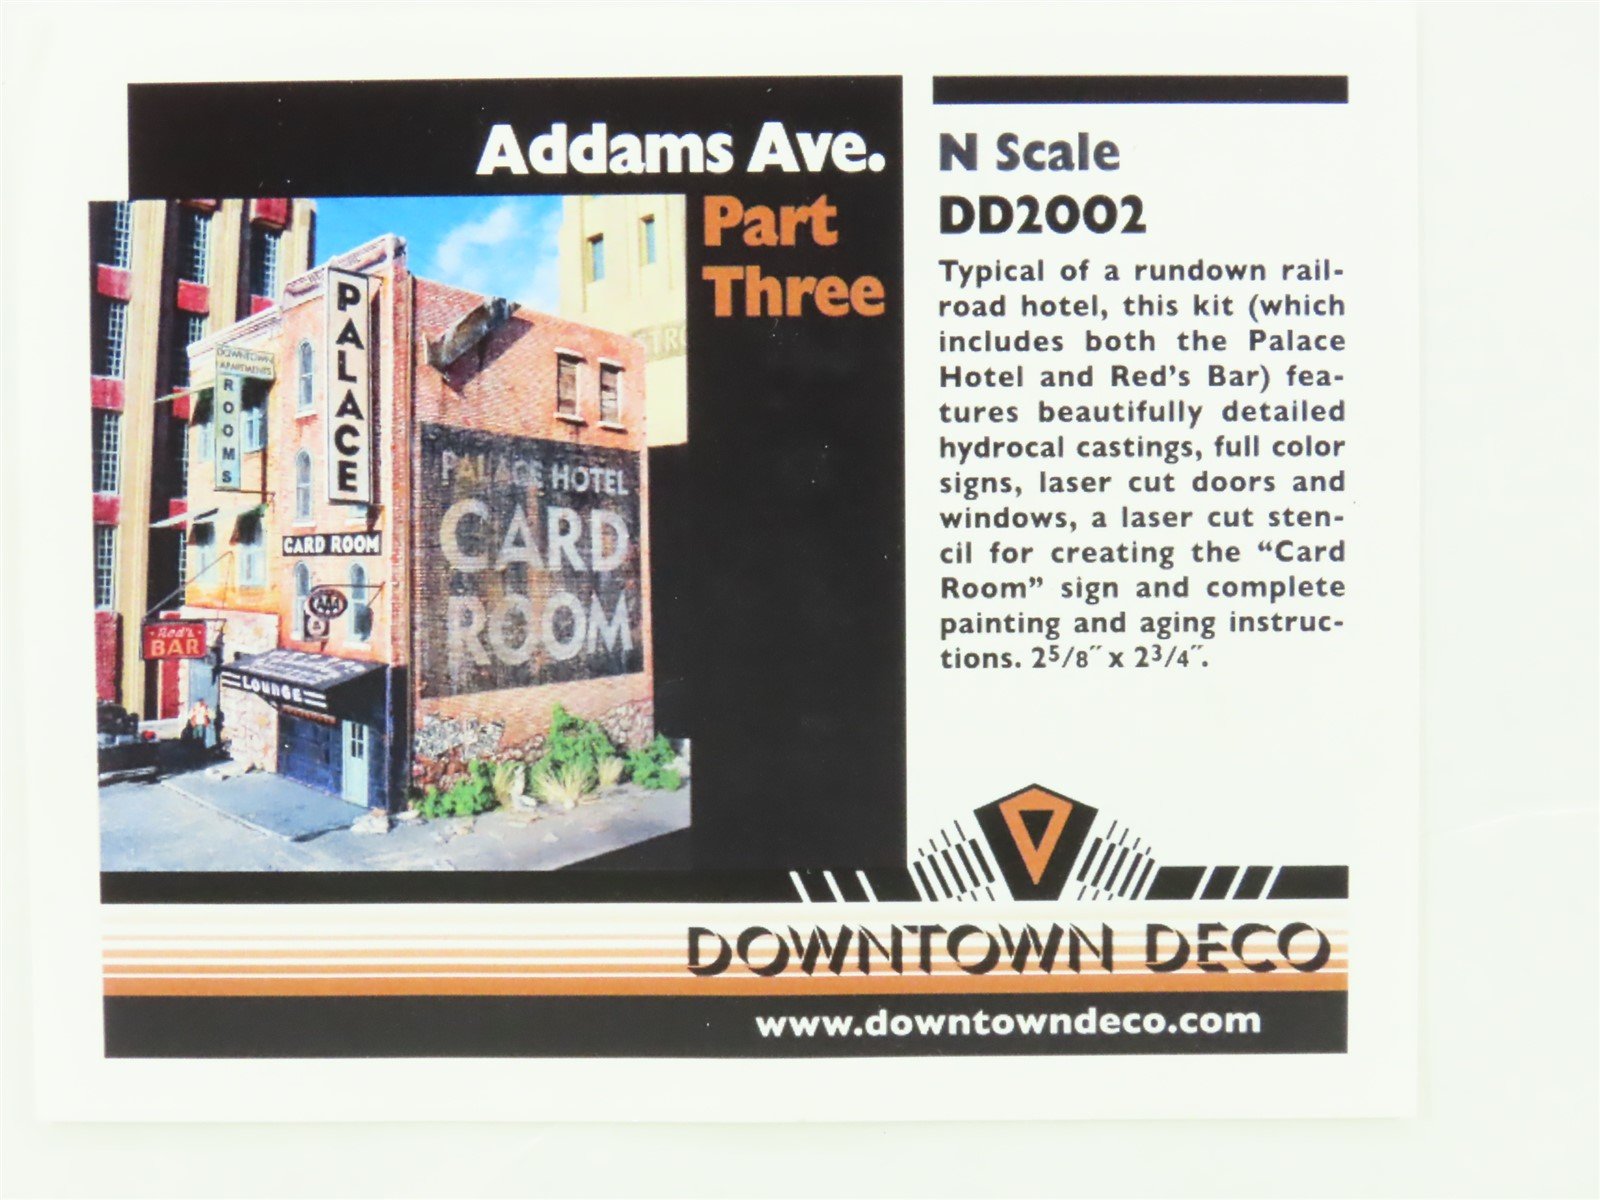 N 1/160 Scale Downtown Deco Kit #DD2002 Addams Ave. - Part Three